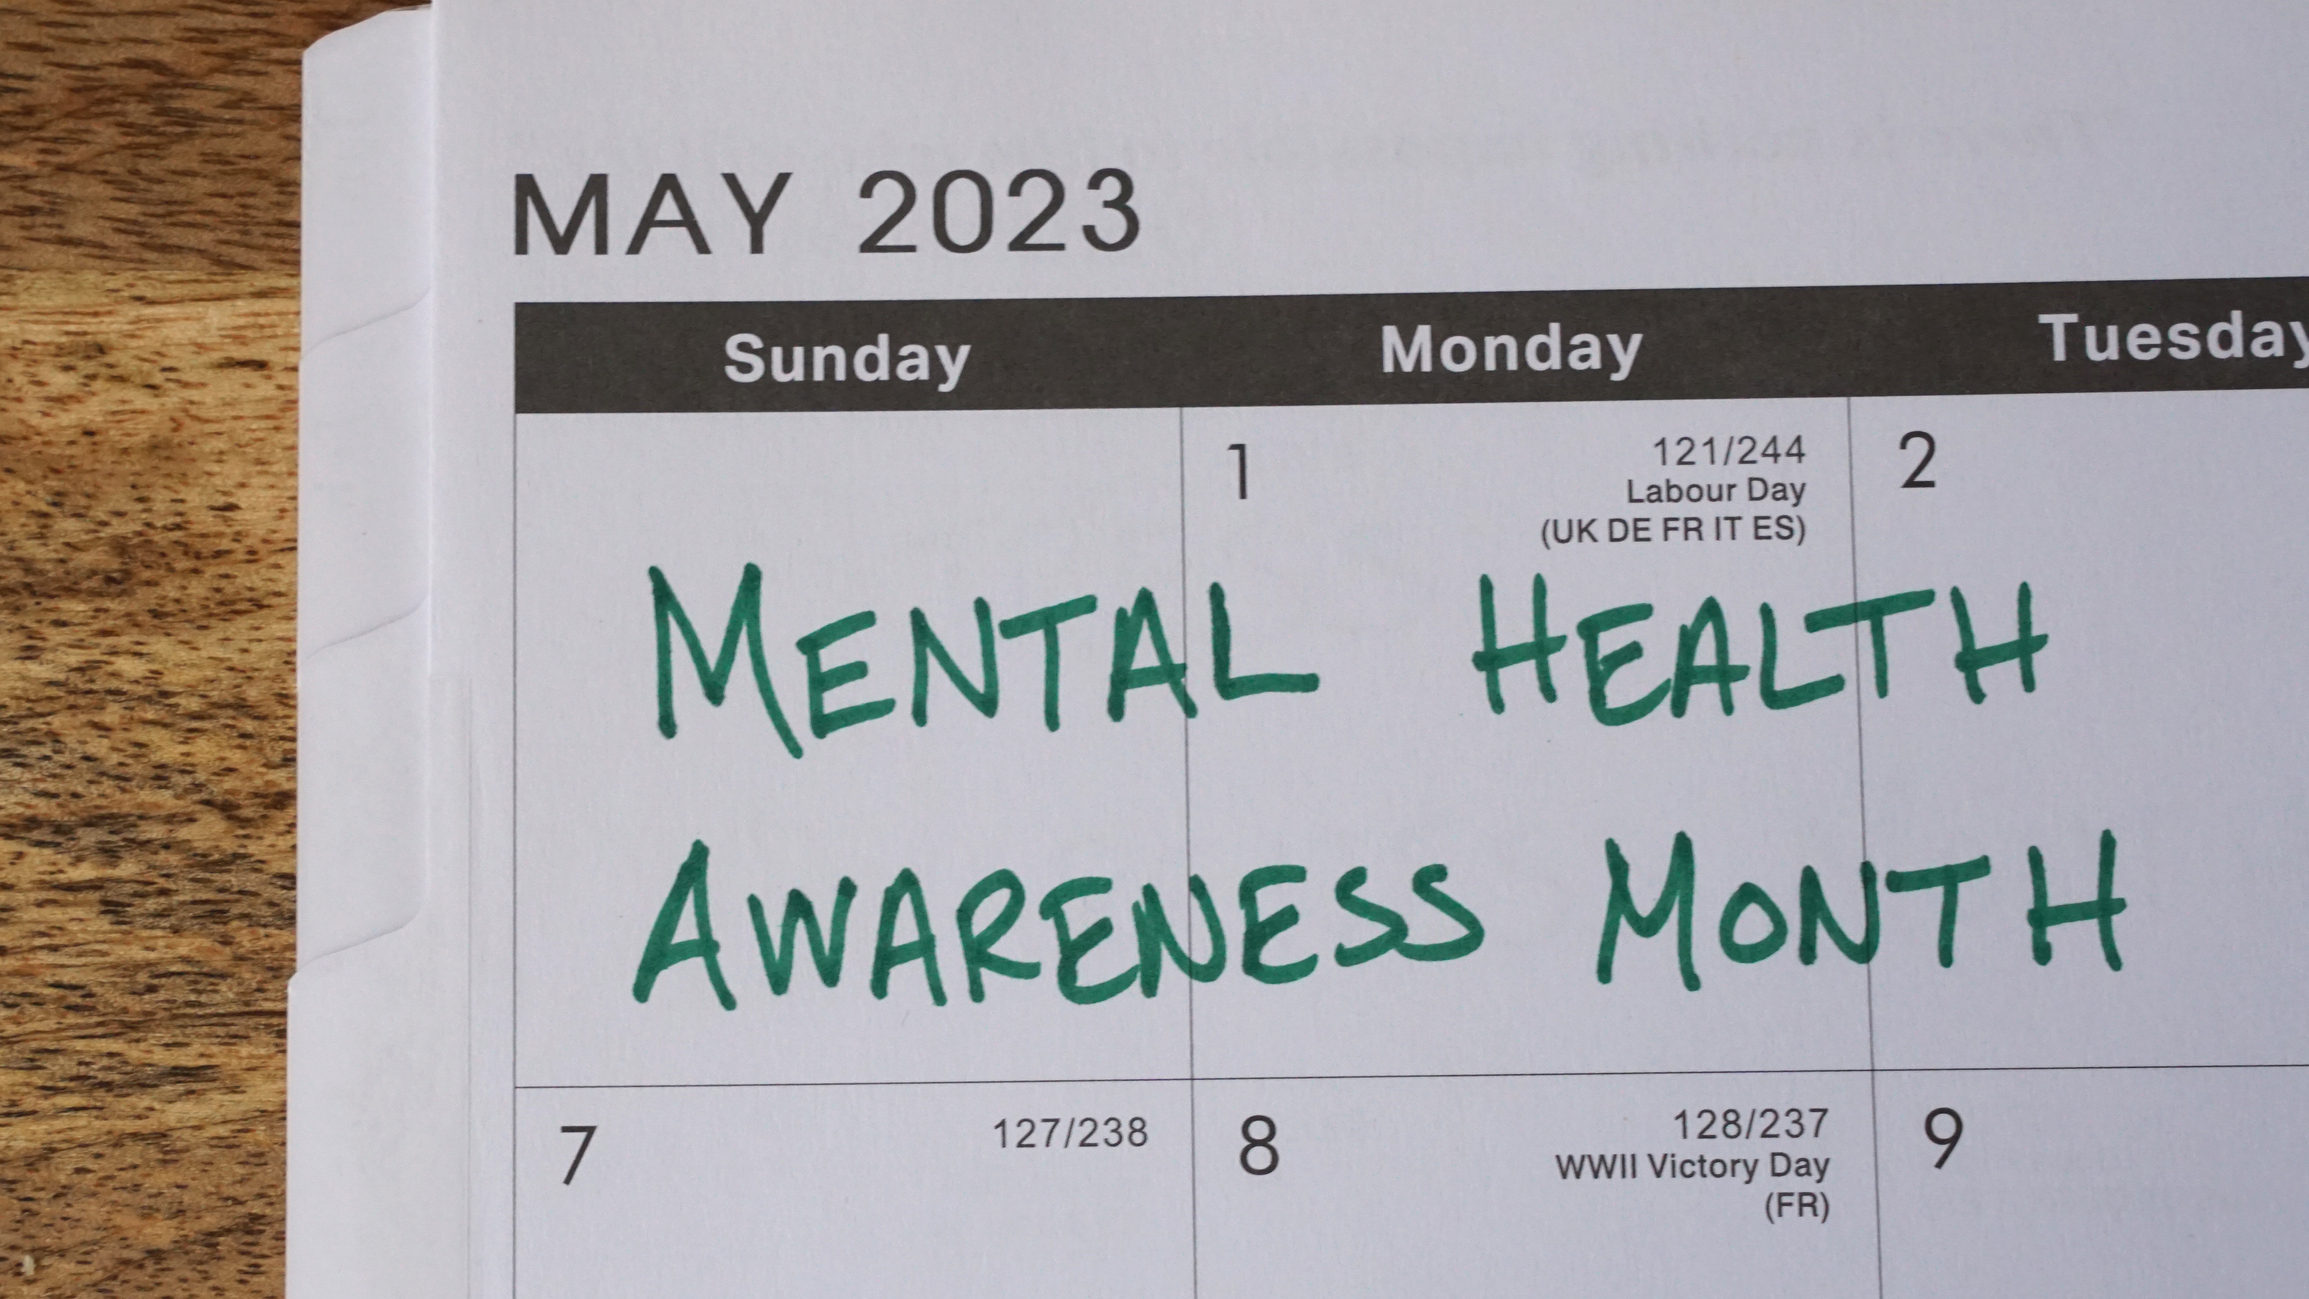 Mental Health Awareness Month marked on a May 2023 calendar.